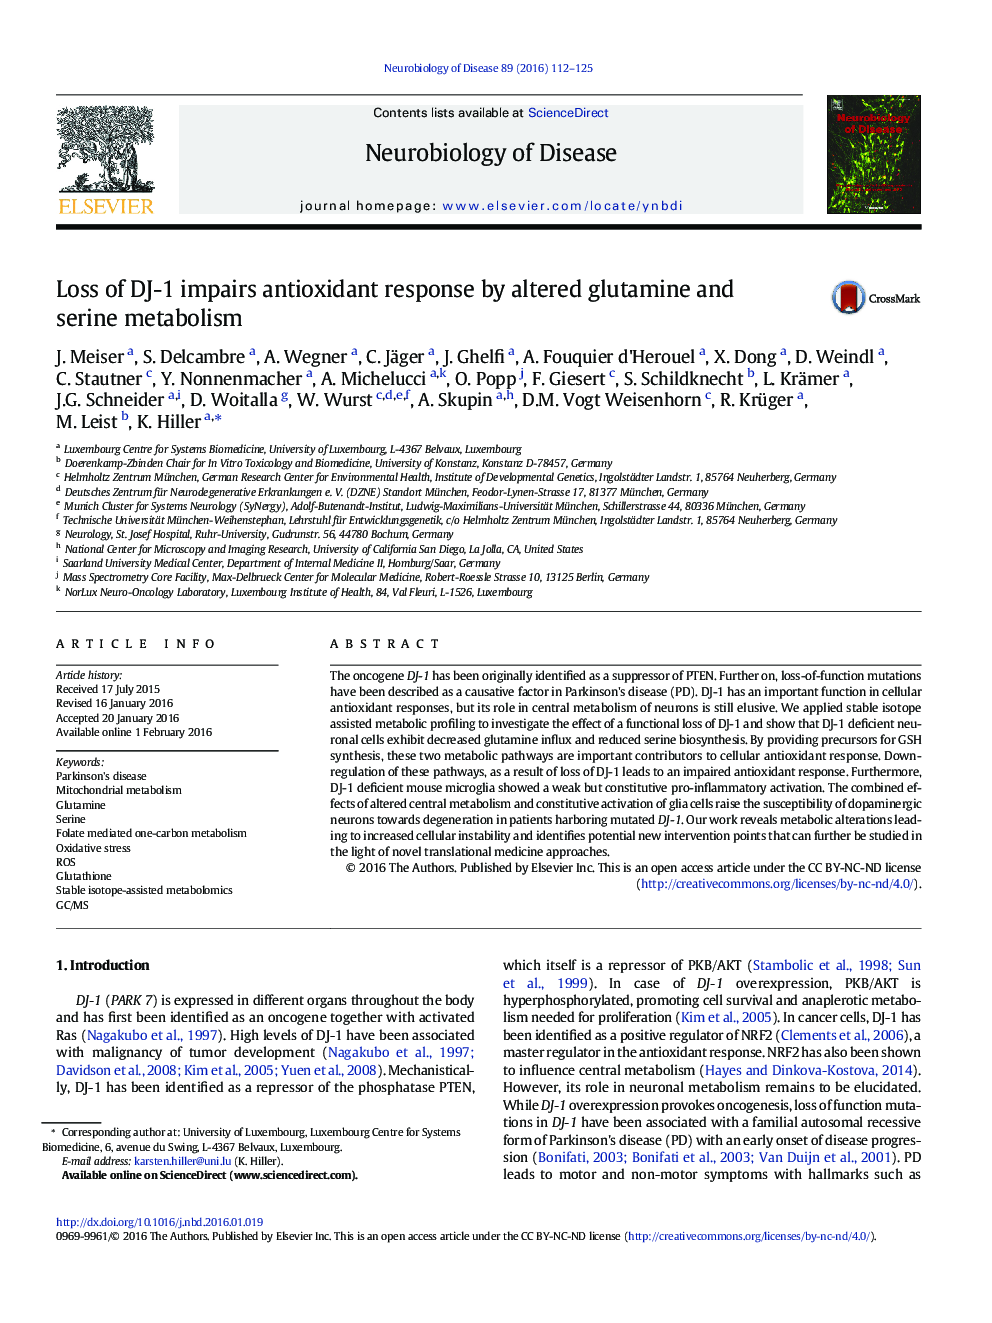 Loss of DJ-1 impairs antioxidant response by altered glutamine and serine metabolism